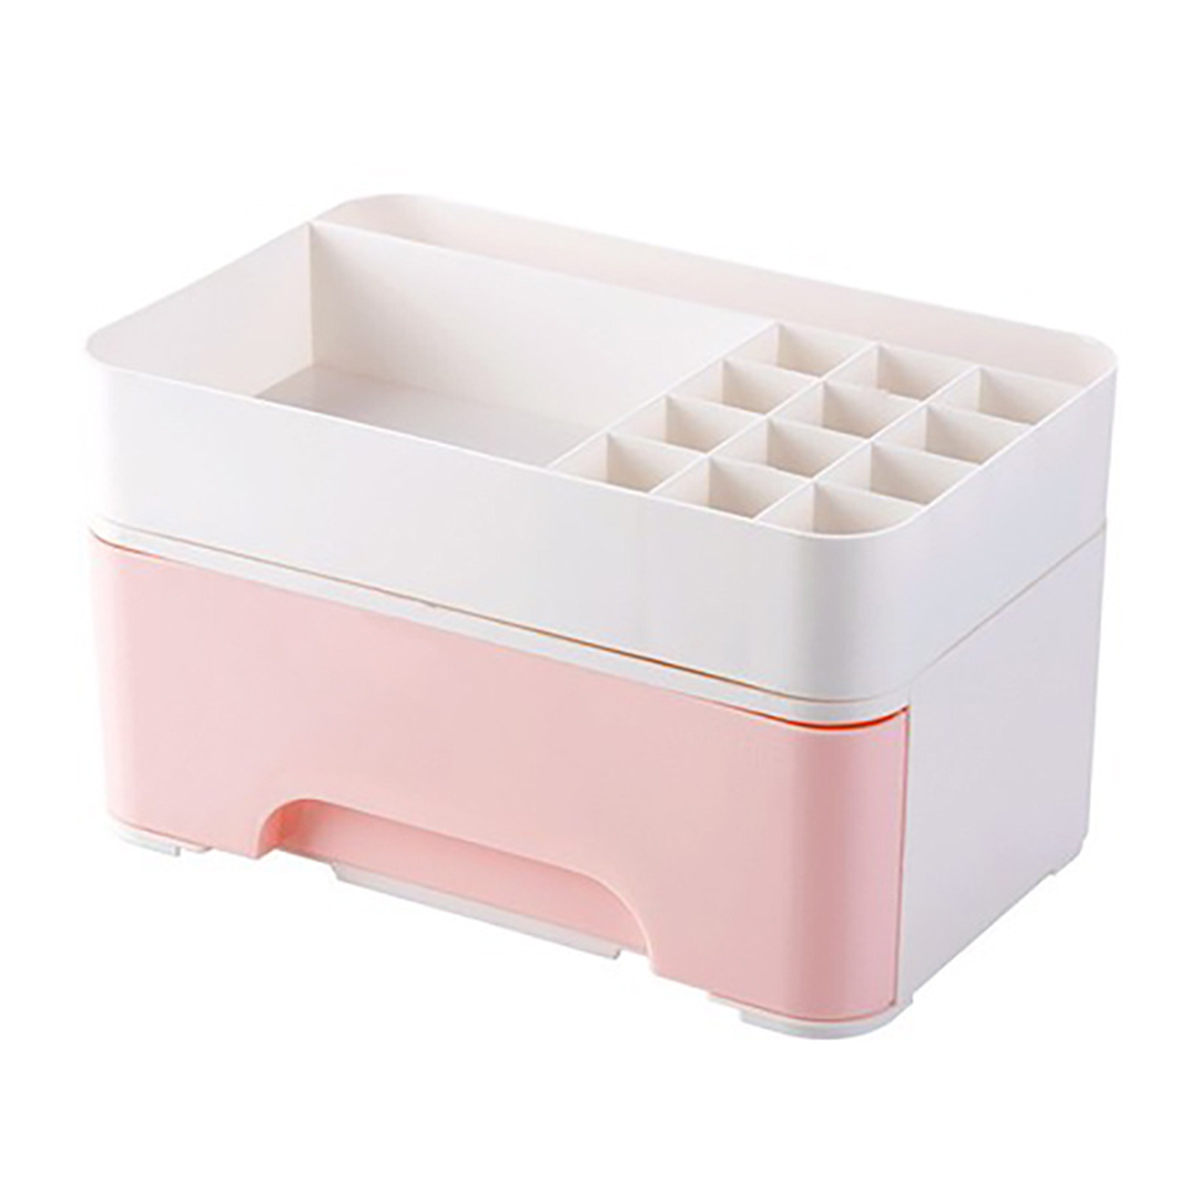 Desk-Skin-Care-Products-Storage-Box-Multi-functional-Lipstick-Cosmetic-Storage-Box-with-Drawer-Home--1763759-7